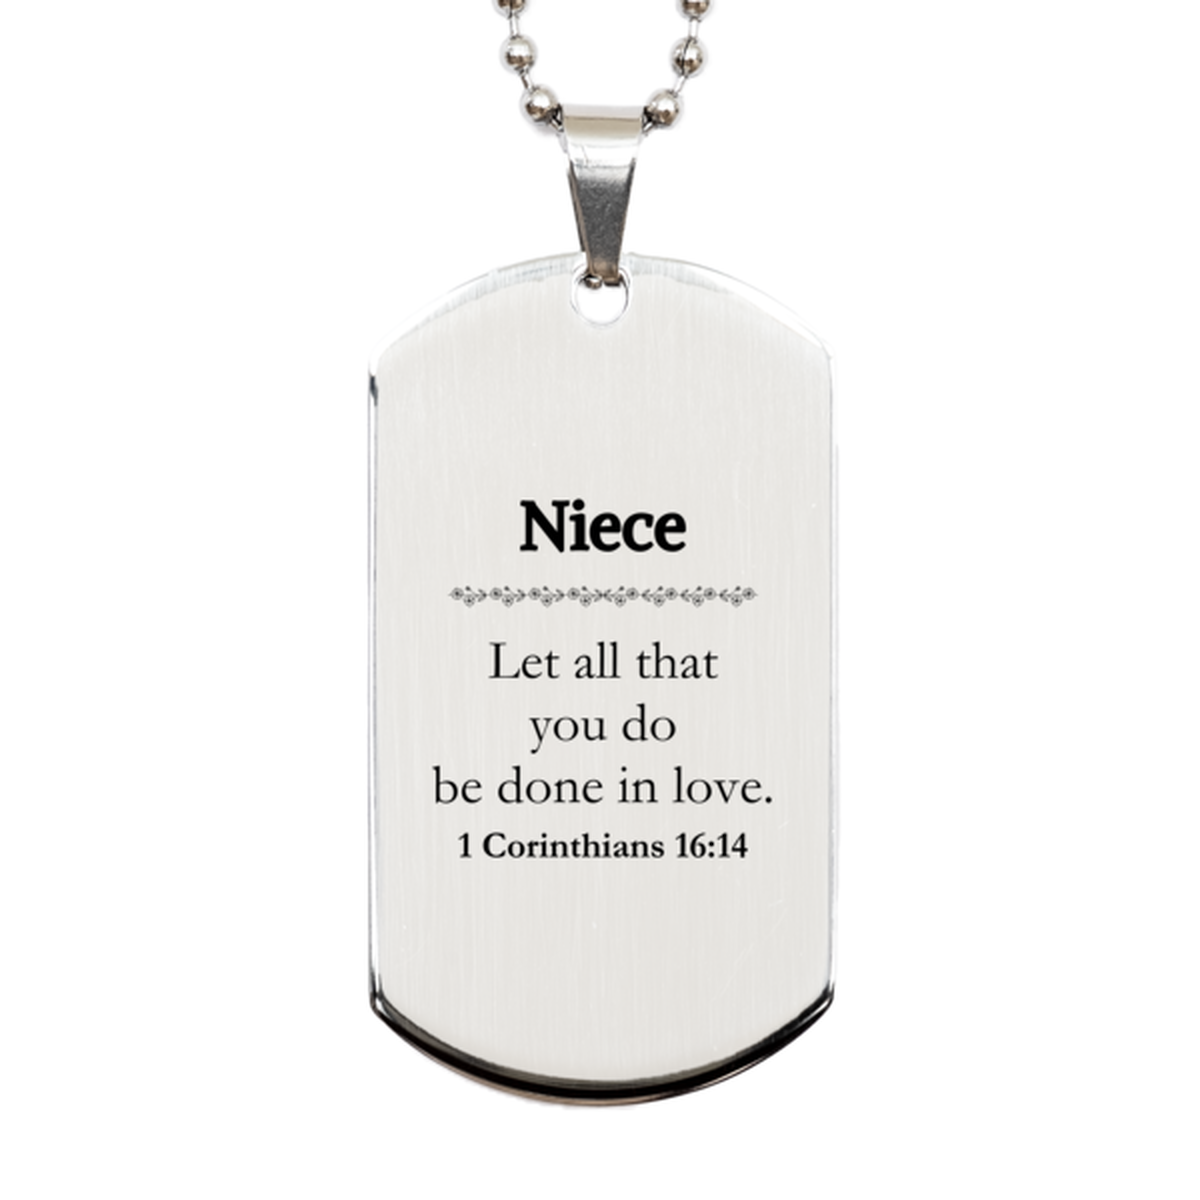 Christian Niece Gifts, Let all that you do be done in love, Bible Verse Scripture Silver Dog Tag, Baptism Confirmation Gifts for Niece